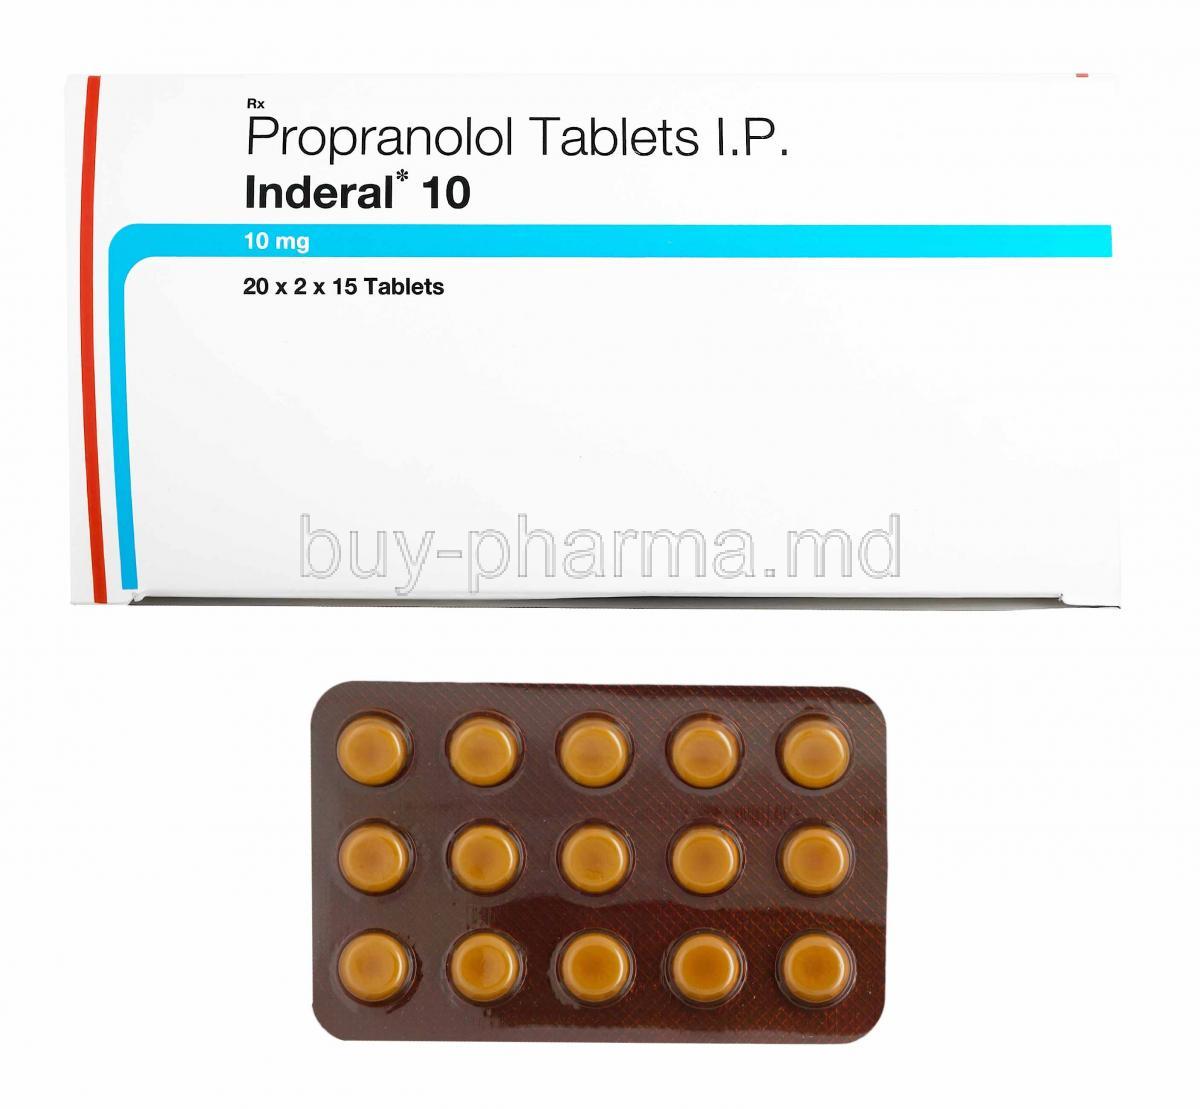 Inderal, Propranolol 10mg box and tablets